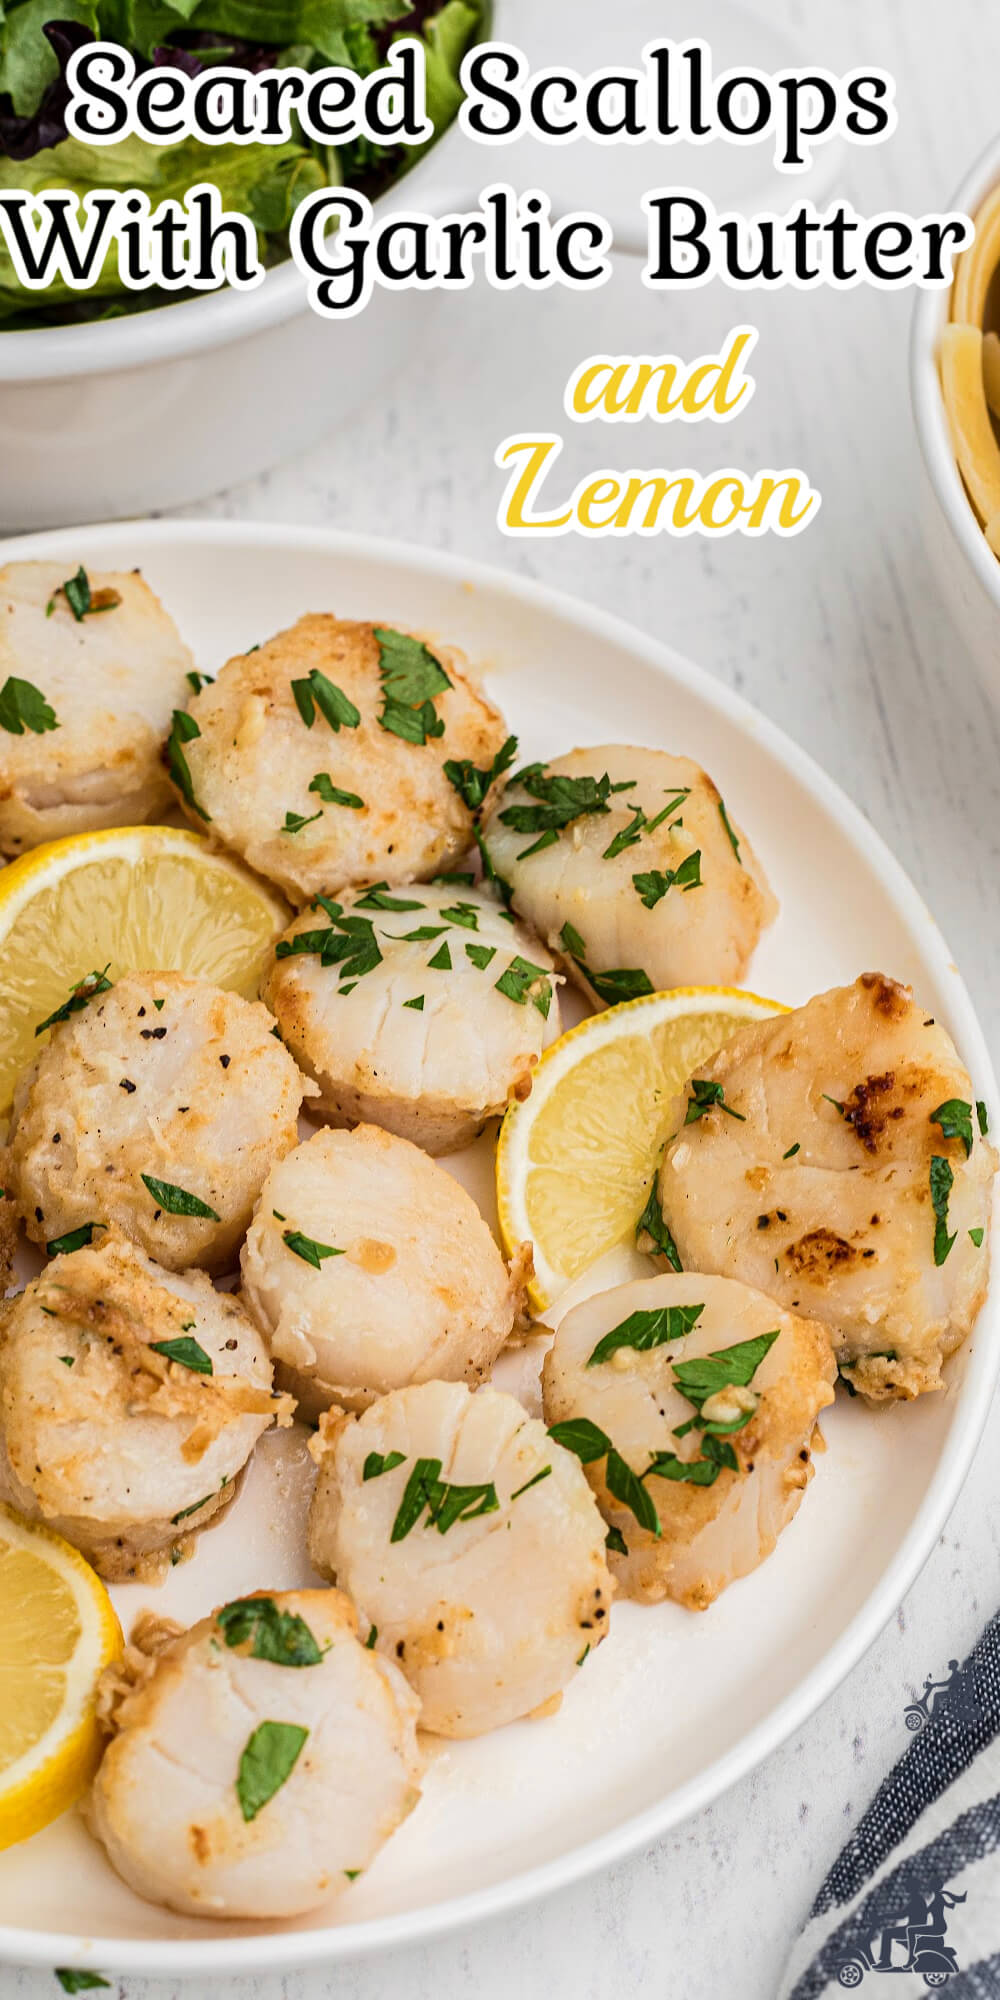 If you’re looking for a quick and easy seafood dish, you can’t go wrong with these pan-seared scallops. They’re seared to perfection with a golden-brown crust, flavored in a mix of butter garlic, and chopped parsley! Enjoy them with linguine pasta or another side dish of your choice. 